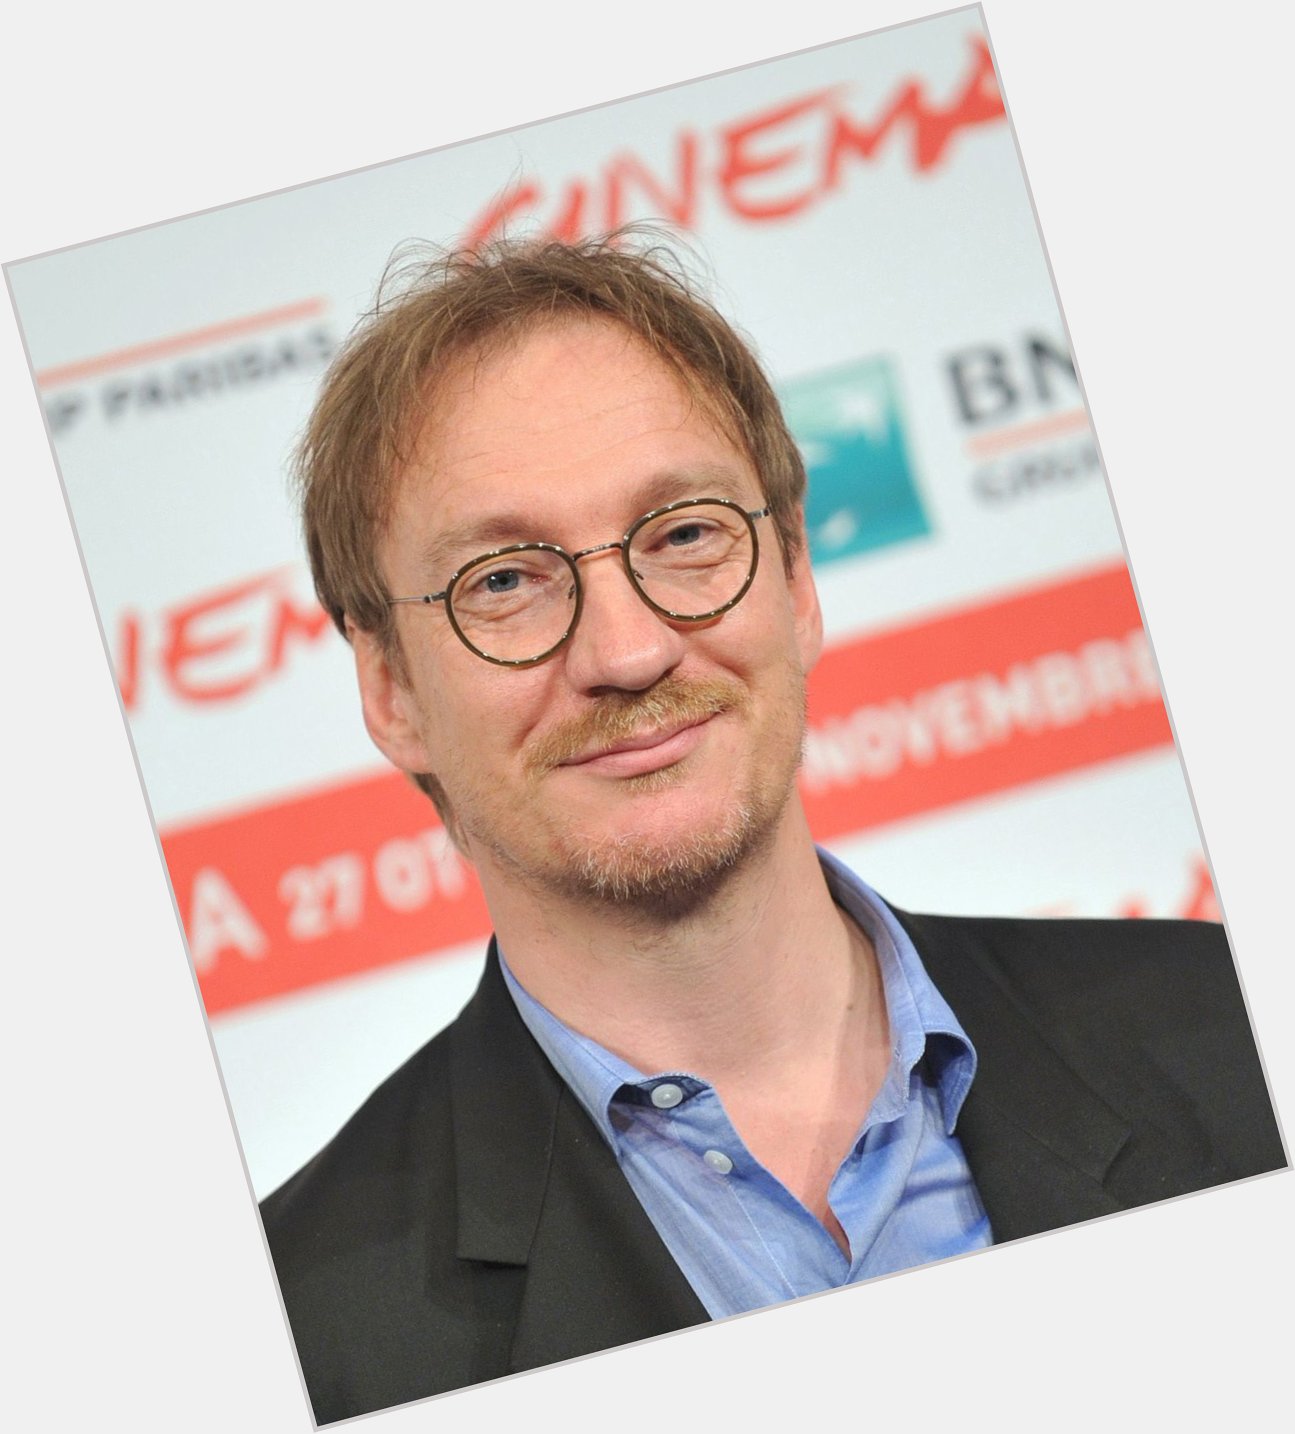  Happy birthday to David Thewlis who portrayed Remus Lupin in the films! 